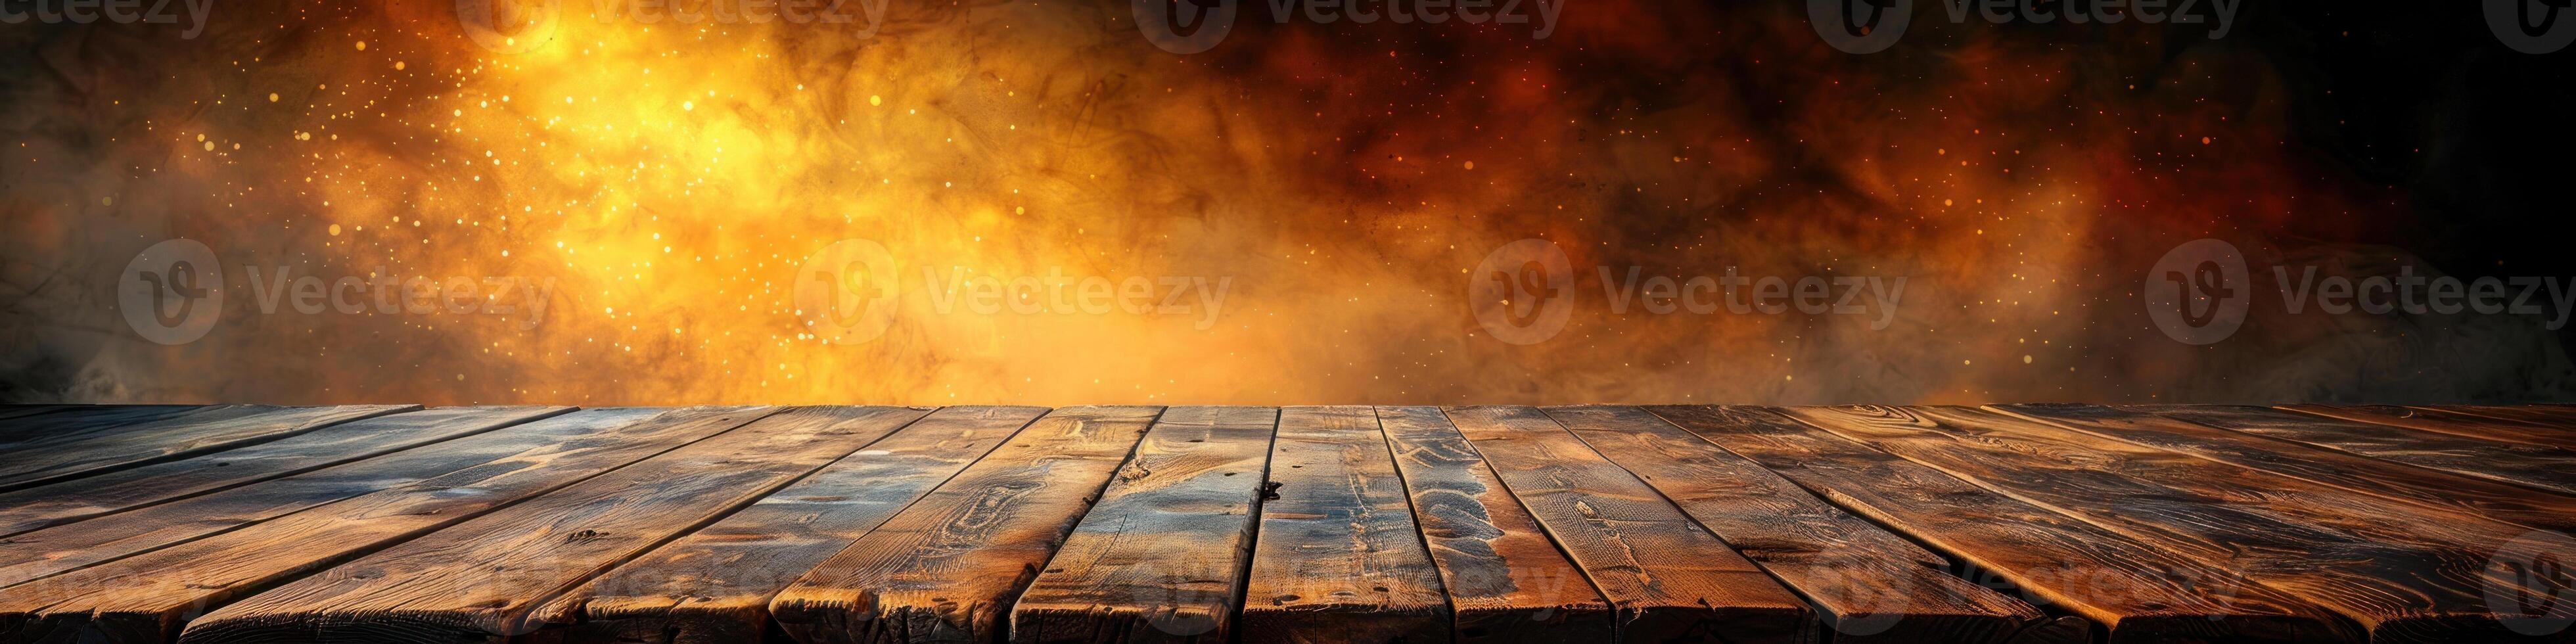 A wooden floor is engulfed in flames and smoke, creating a dangerous and destructive scene photo